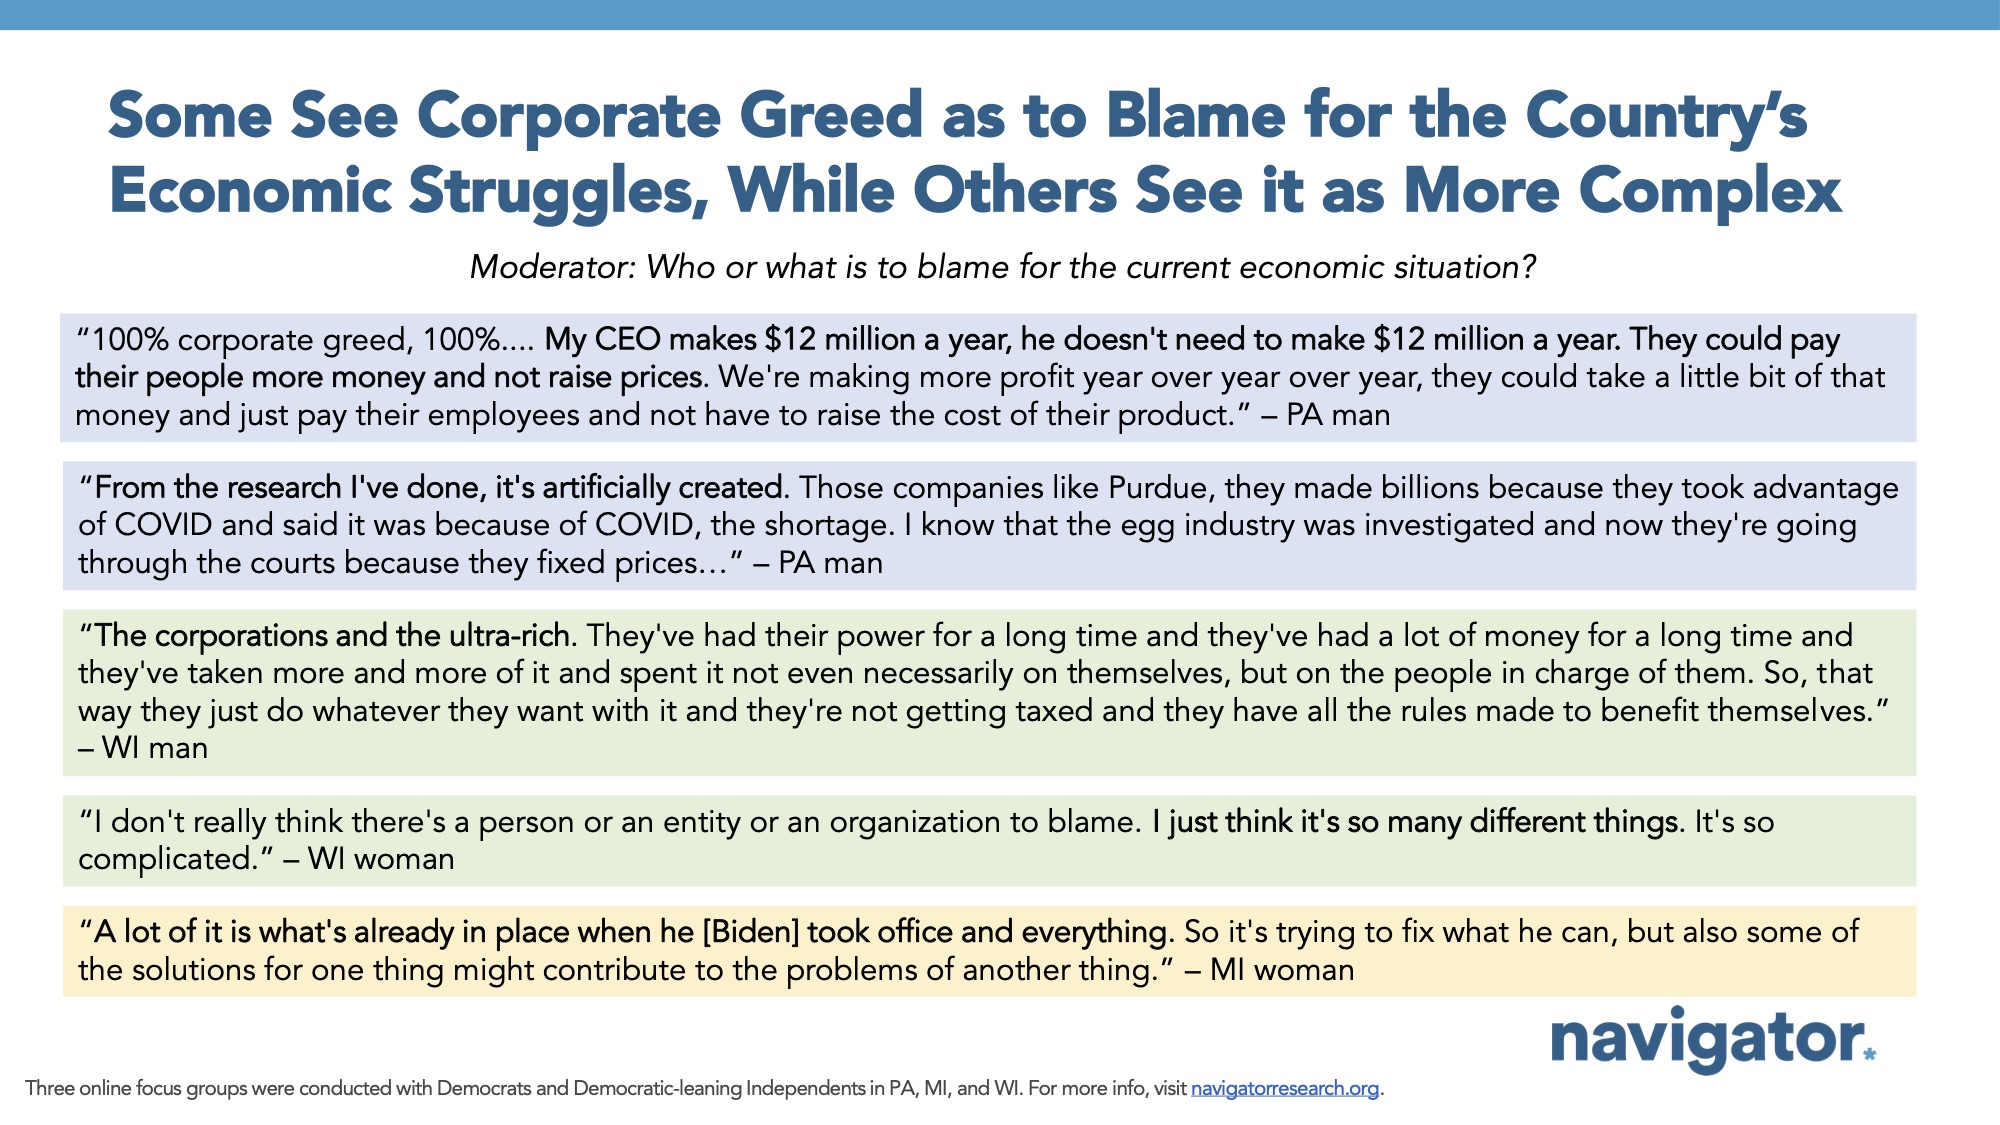 Focus group report slide titled: Some See Corporate Greed as to Blame for the Country’s Economic Struggles, While Others See it as More Complex